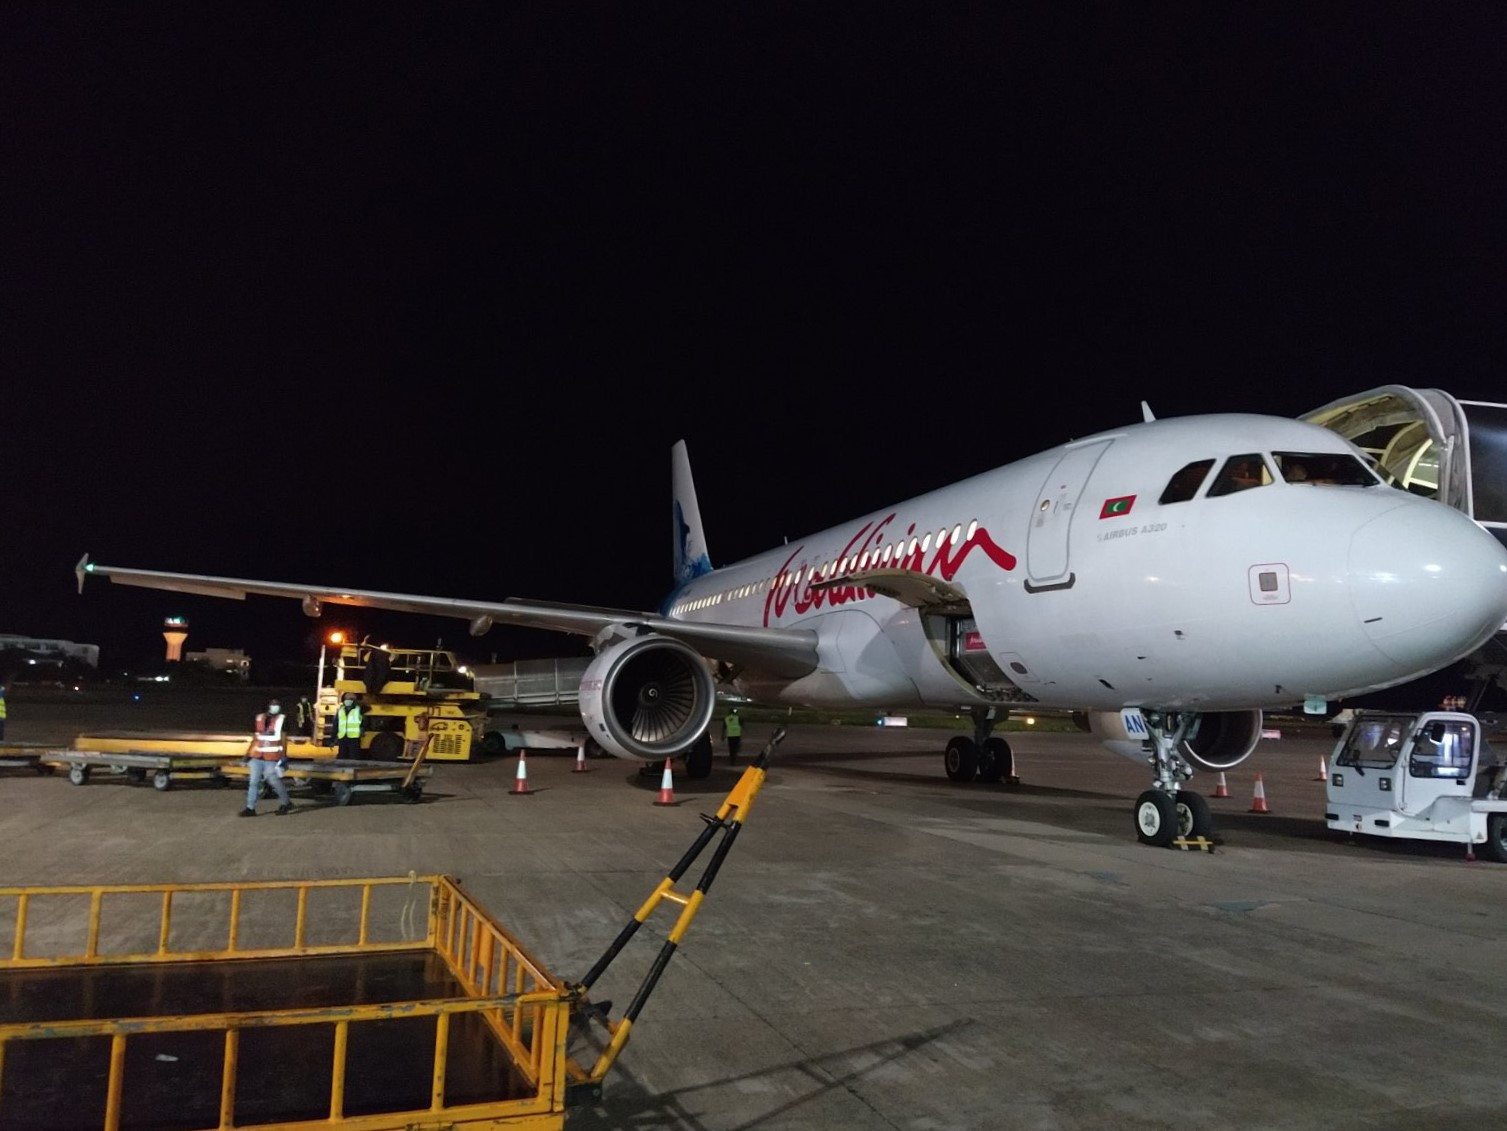 Latest News on Maldives’ National Airline